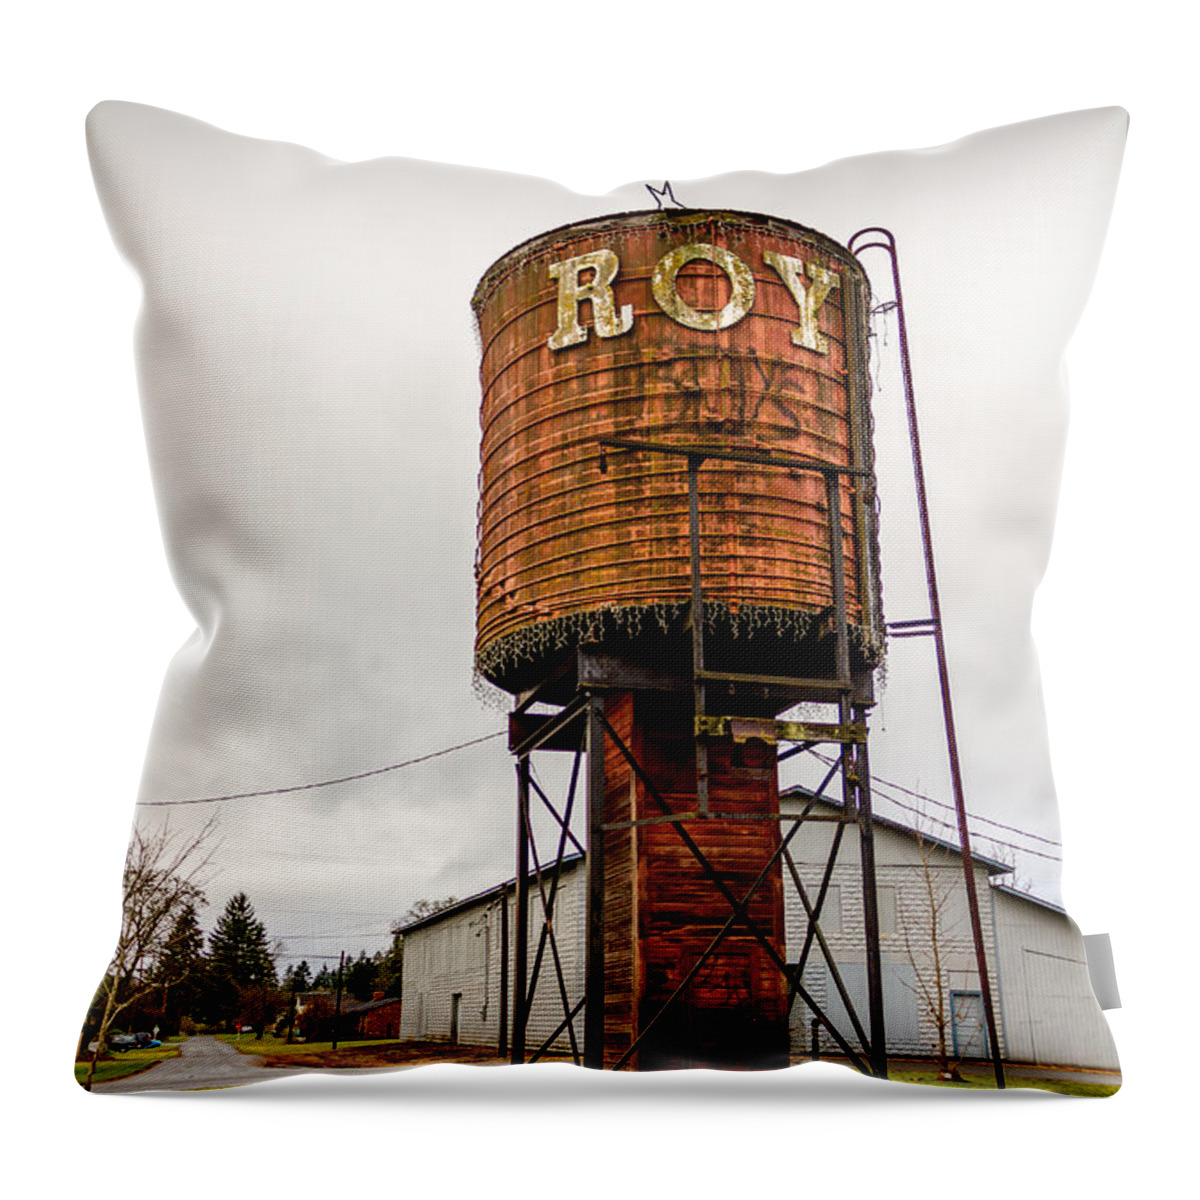 Roy Throw Pillow featuring the photograph The Roy Water Tower by Rob Green